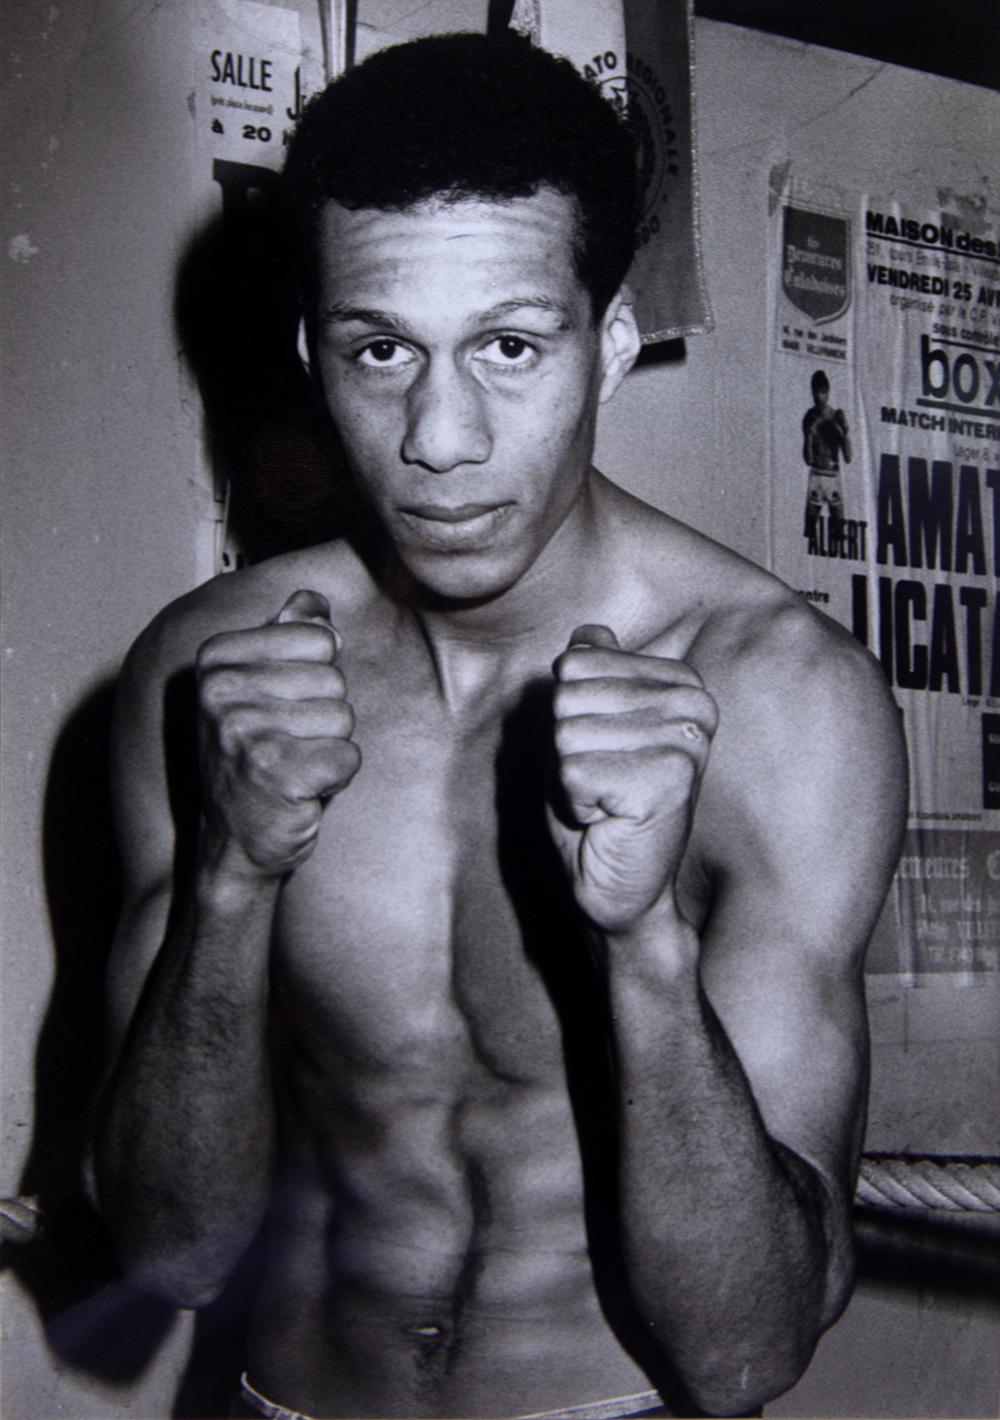 Raphael during his boxing career